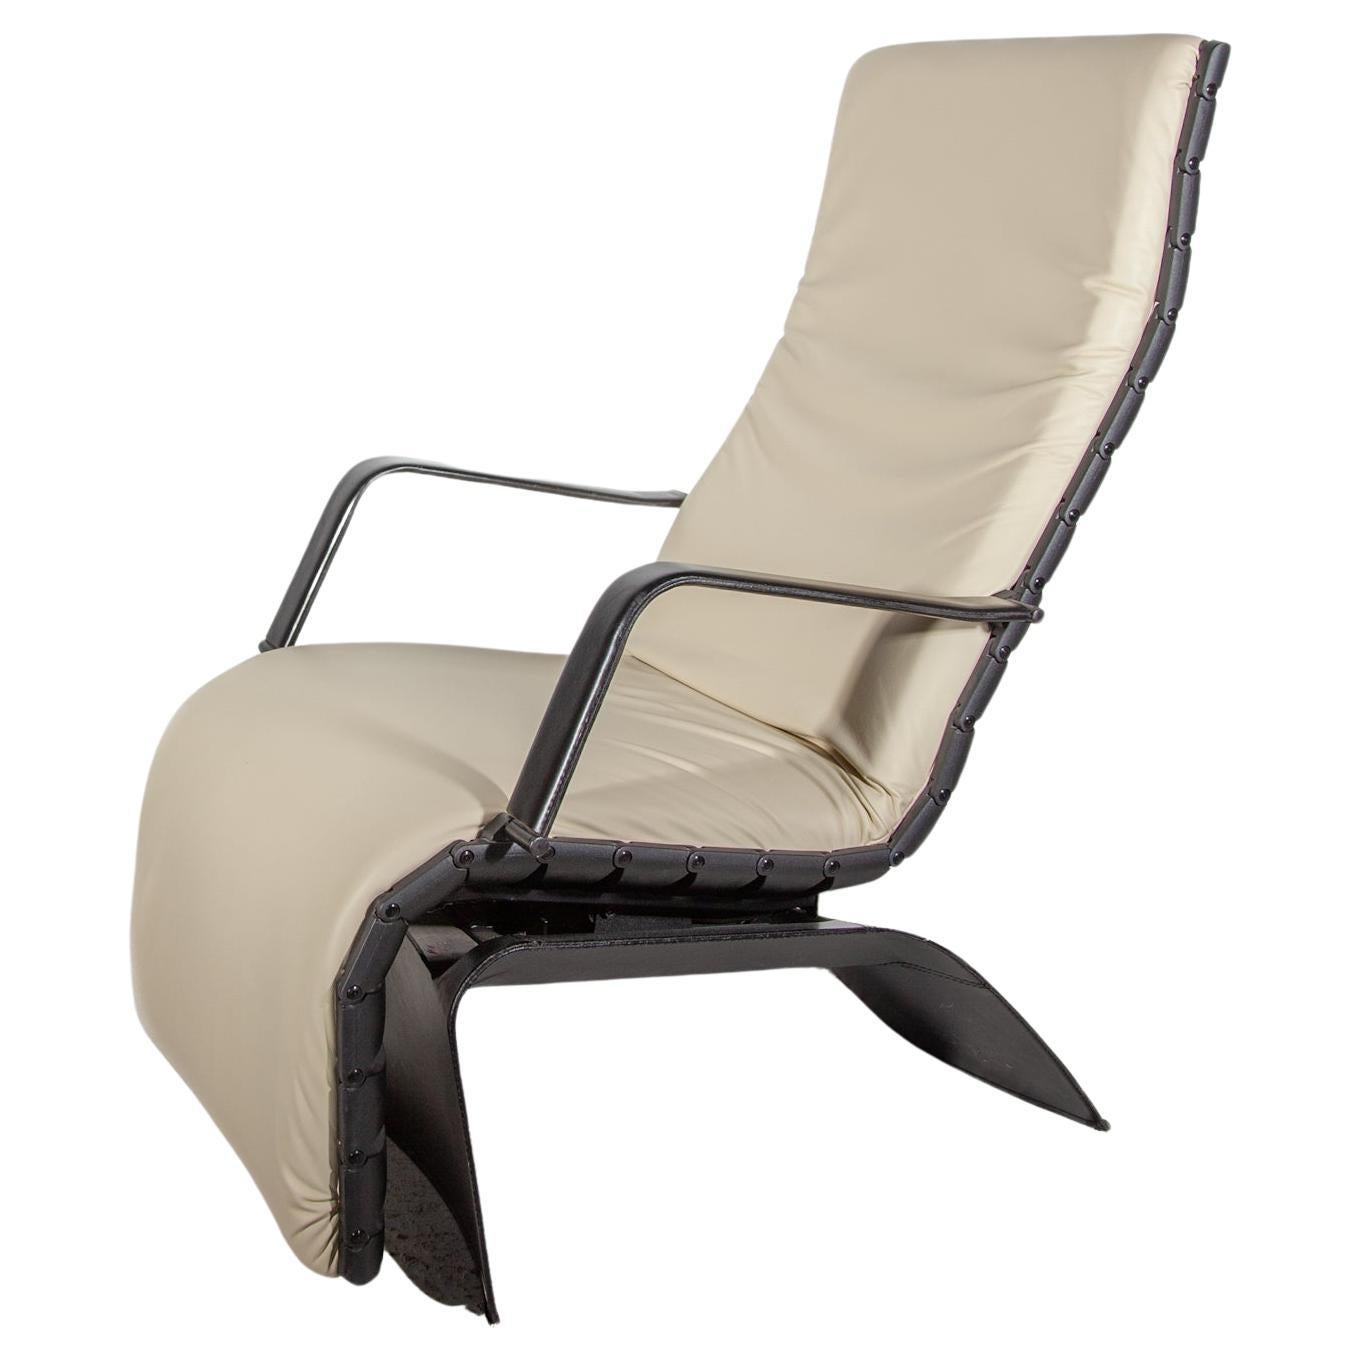 Ergo antropovarius reclining lounge chair designed by Ferdinand Alexander Porsche for Poltrona Frau, Italy 1982. The chair was designed in collaboration with the Institute for Ergonomics at Munich University and features a series of ‘spine’ elements